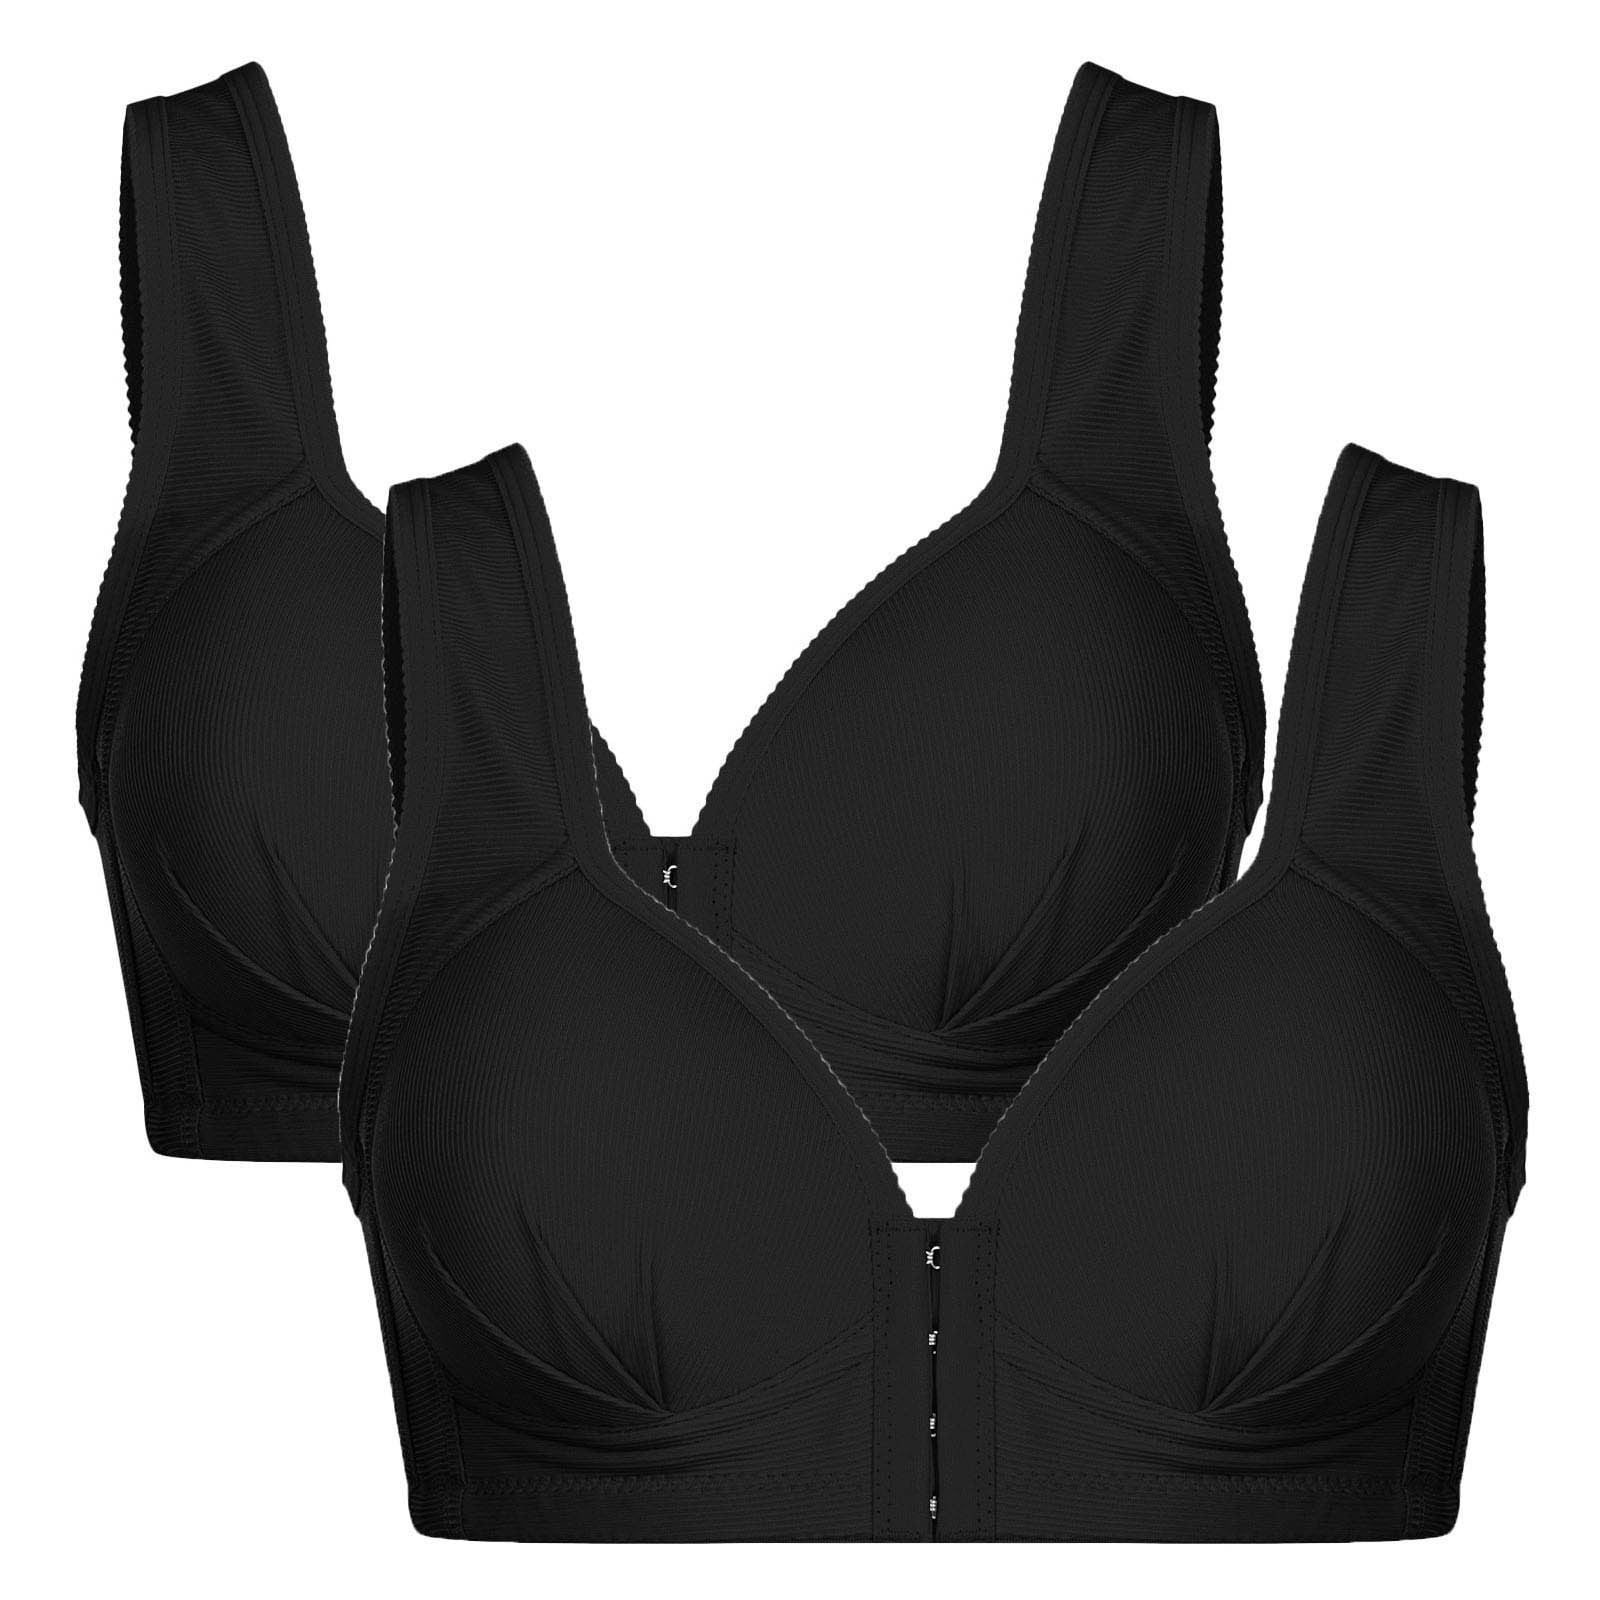 Mother and Child Plus - MARLON UK QUALITY BRA IS AVAILABLE IN SIZES.. .  💥💥💥SOFT AND SMOOTH FEATURES DETACHABLE HAND🔥🔥🔥 JUST SLIDE INTO DM  OR CLICK LINK ON BIO TO ORDER.. PRIZE